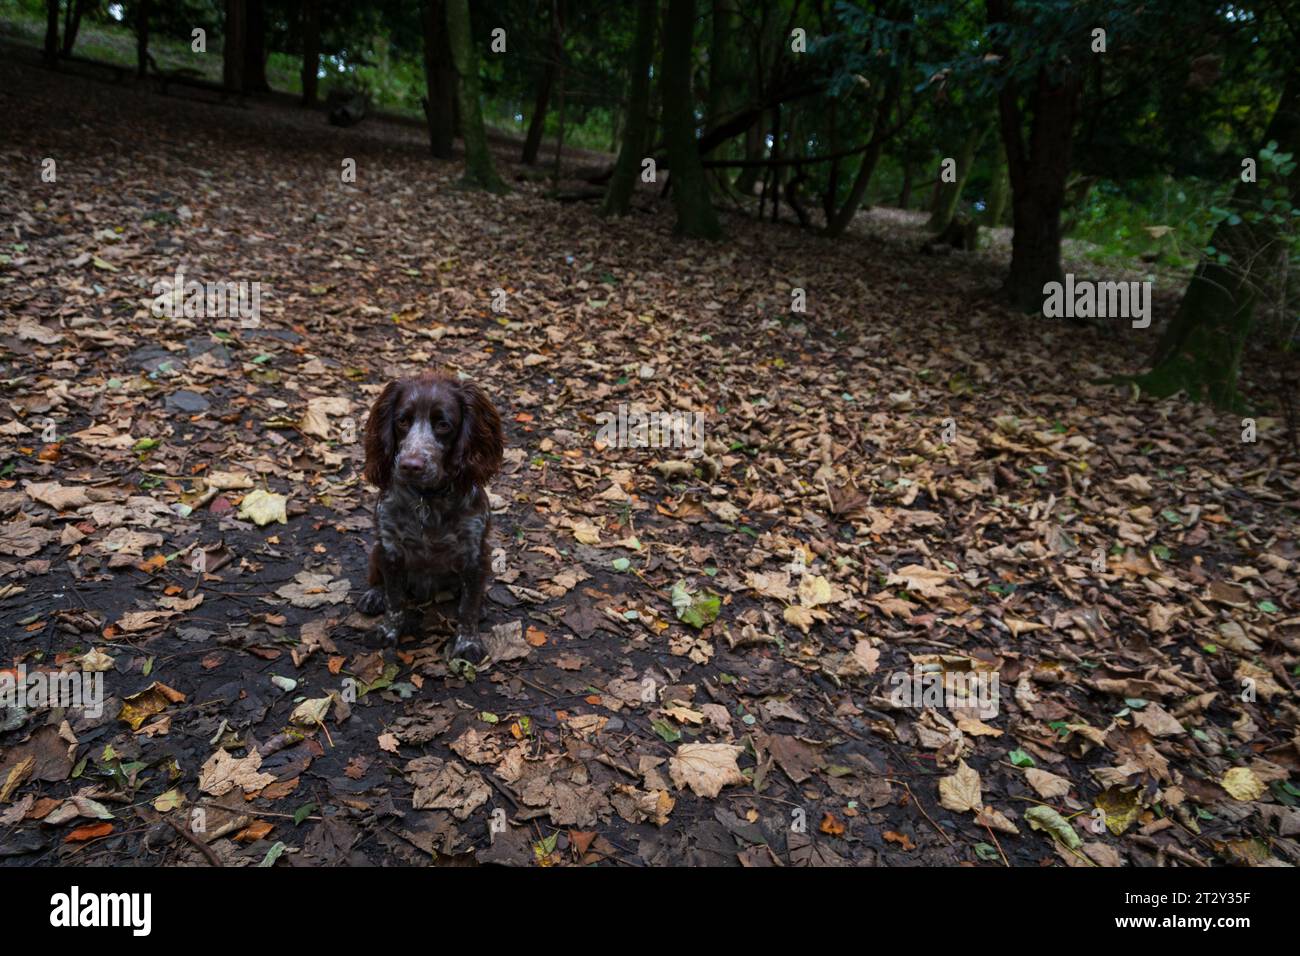 A cute Cocker spaniel puppy in the forest Stock Photo